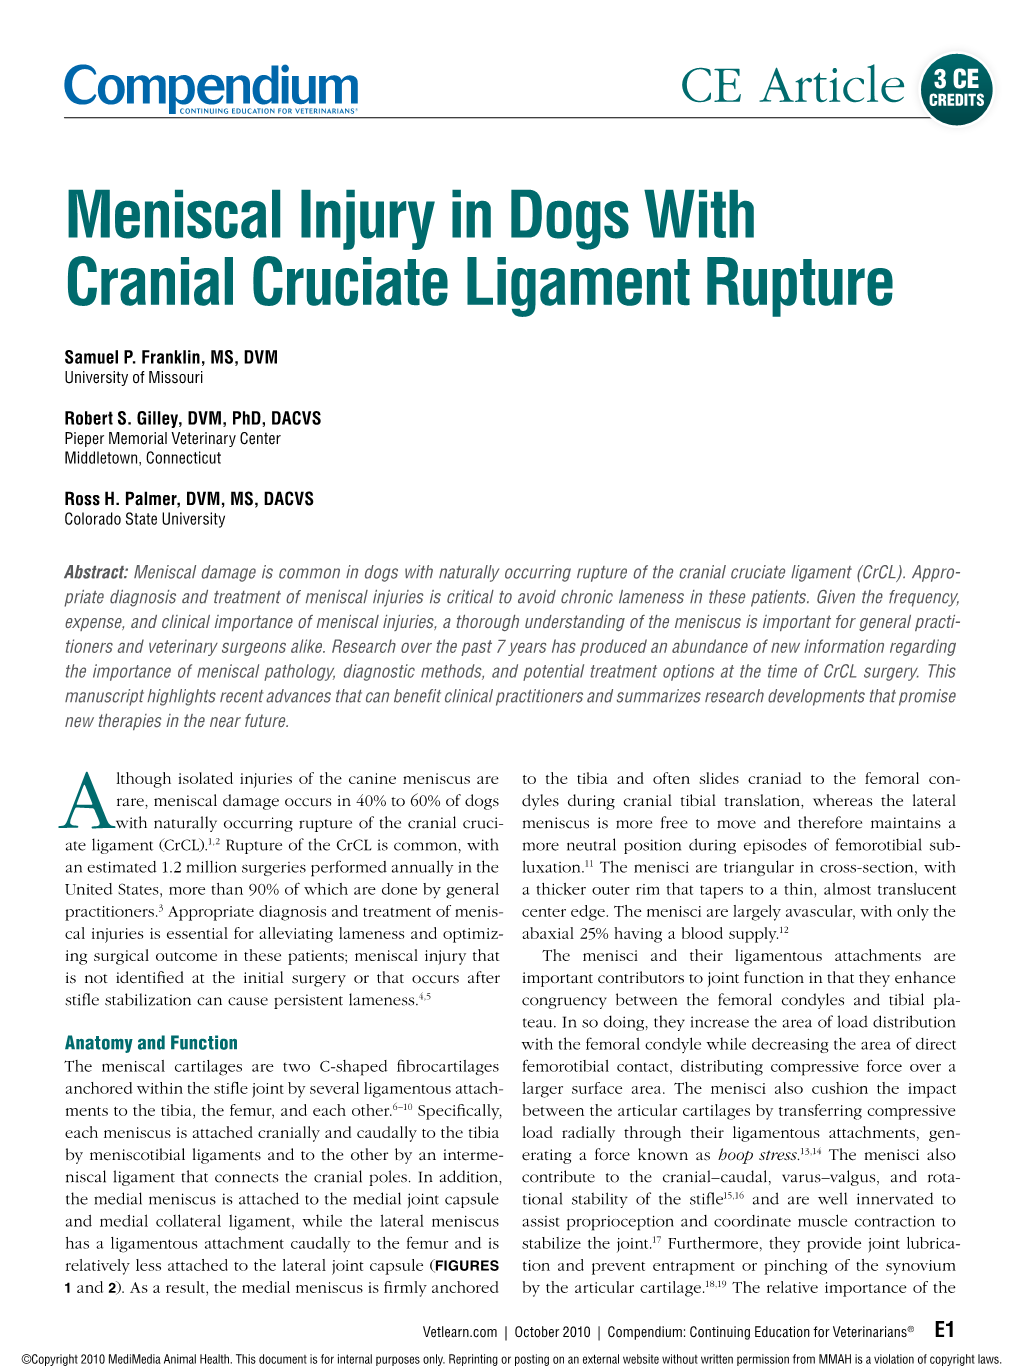 Meniscal Injury in Dogs with Cranial Cruciate Ligament Rupture